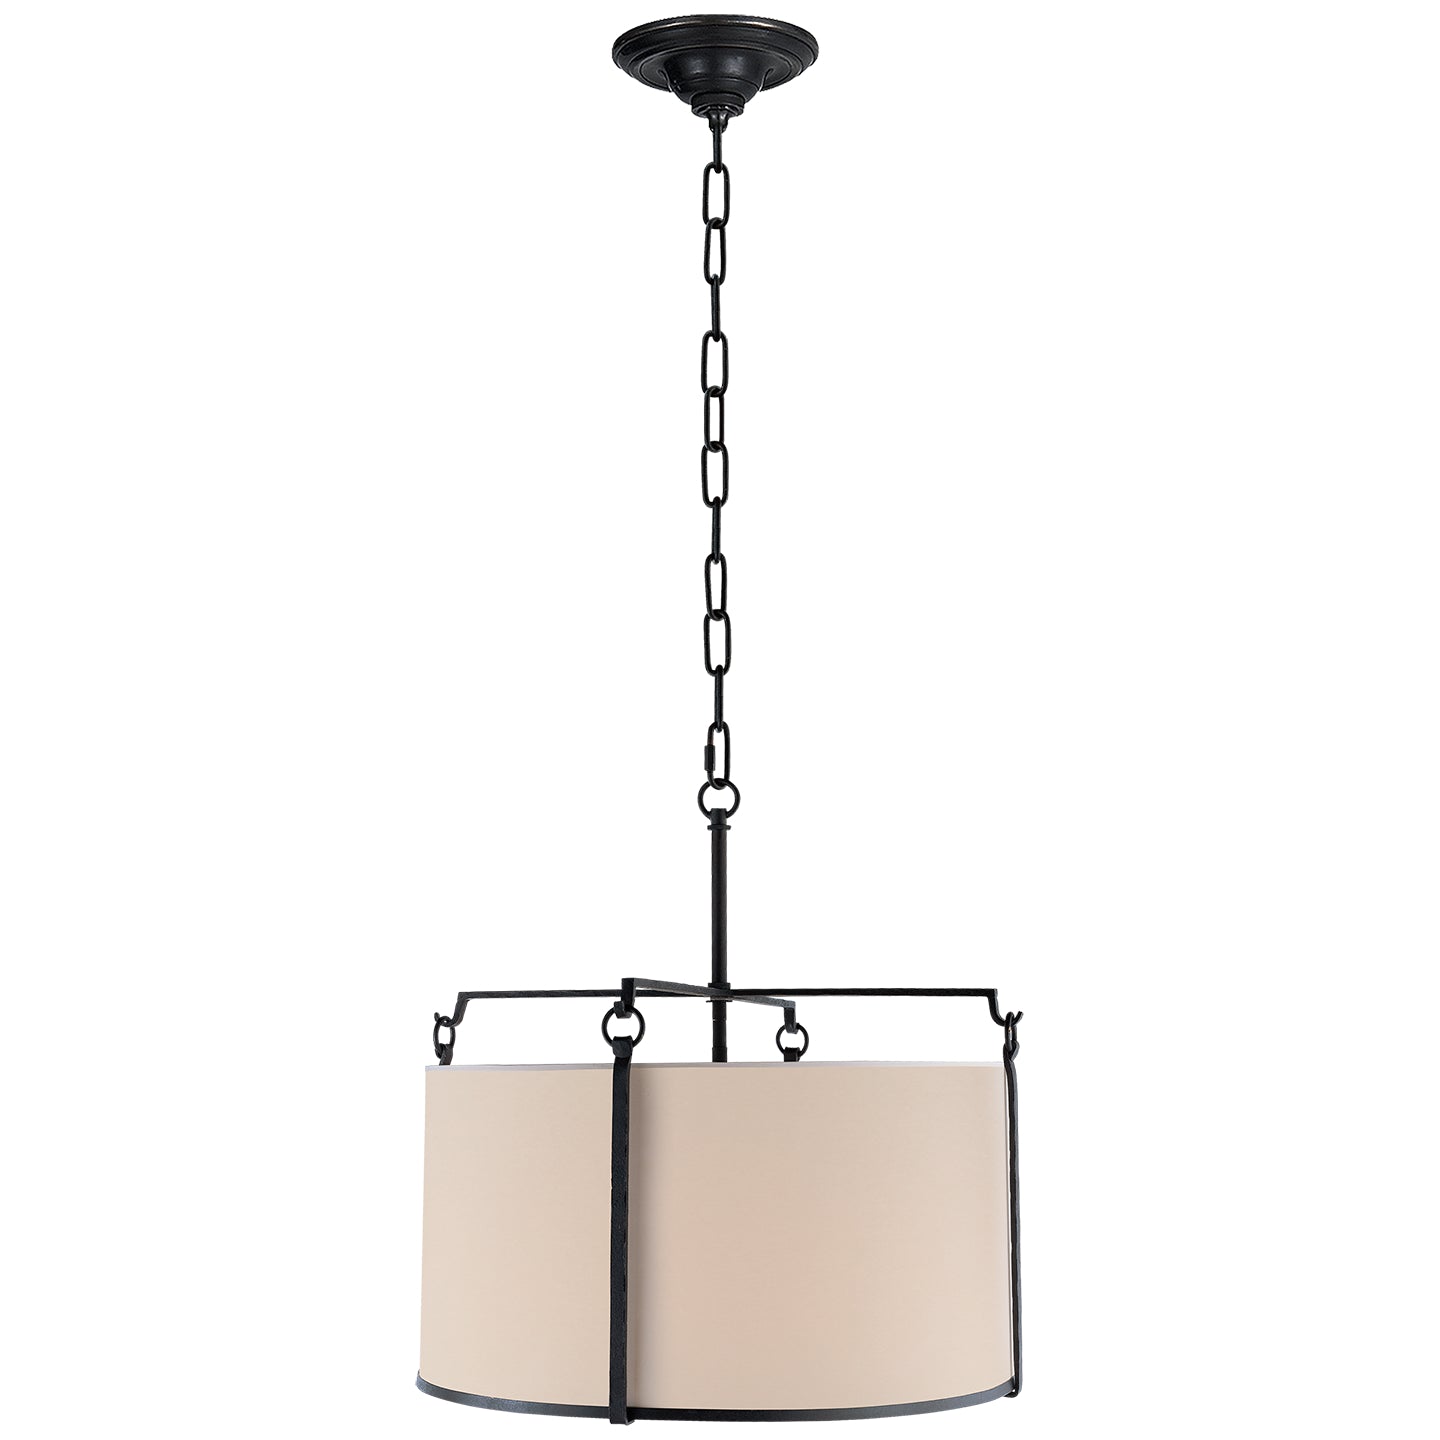 Load image into Gallery viewer, Visual Comfort Signature - S 5030BR-NP - Four Light Pendant - Aspen - Blackened Rust
